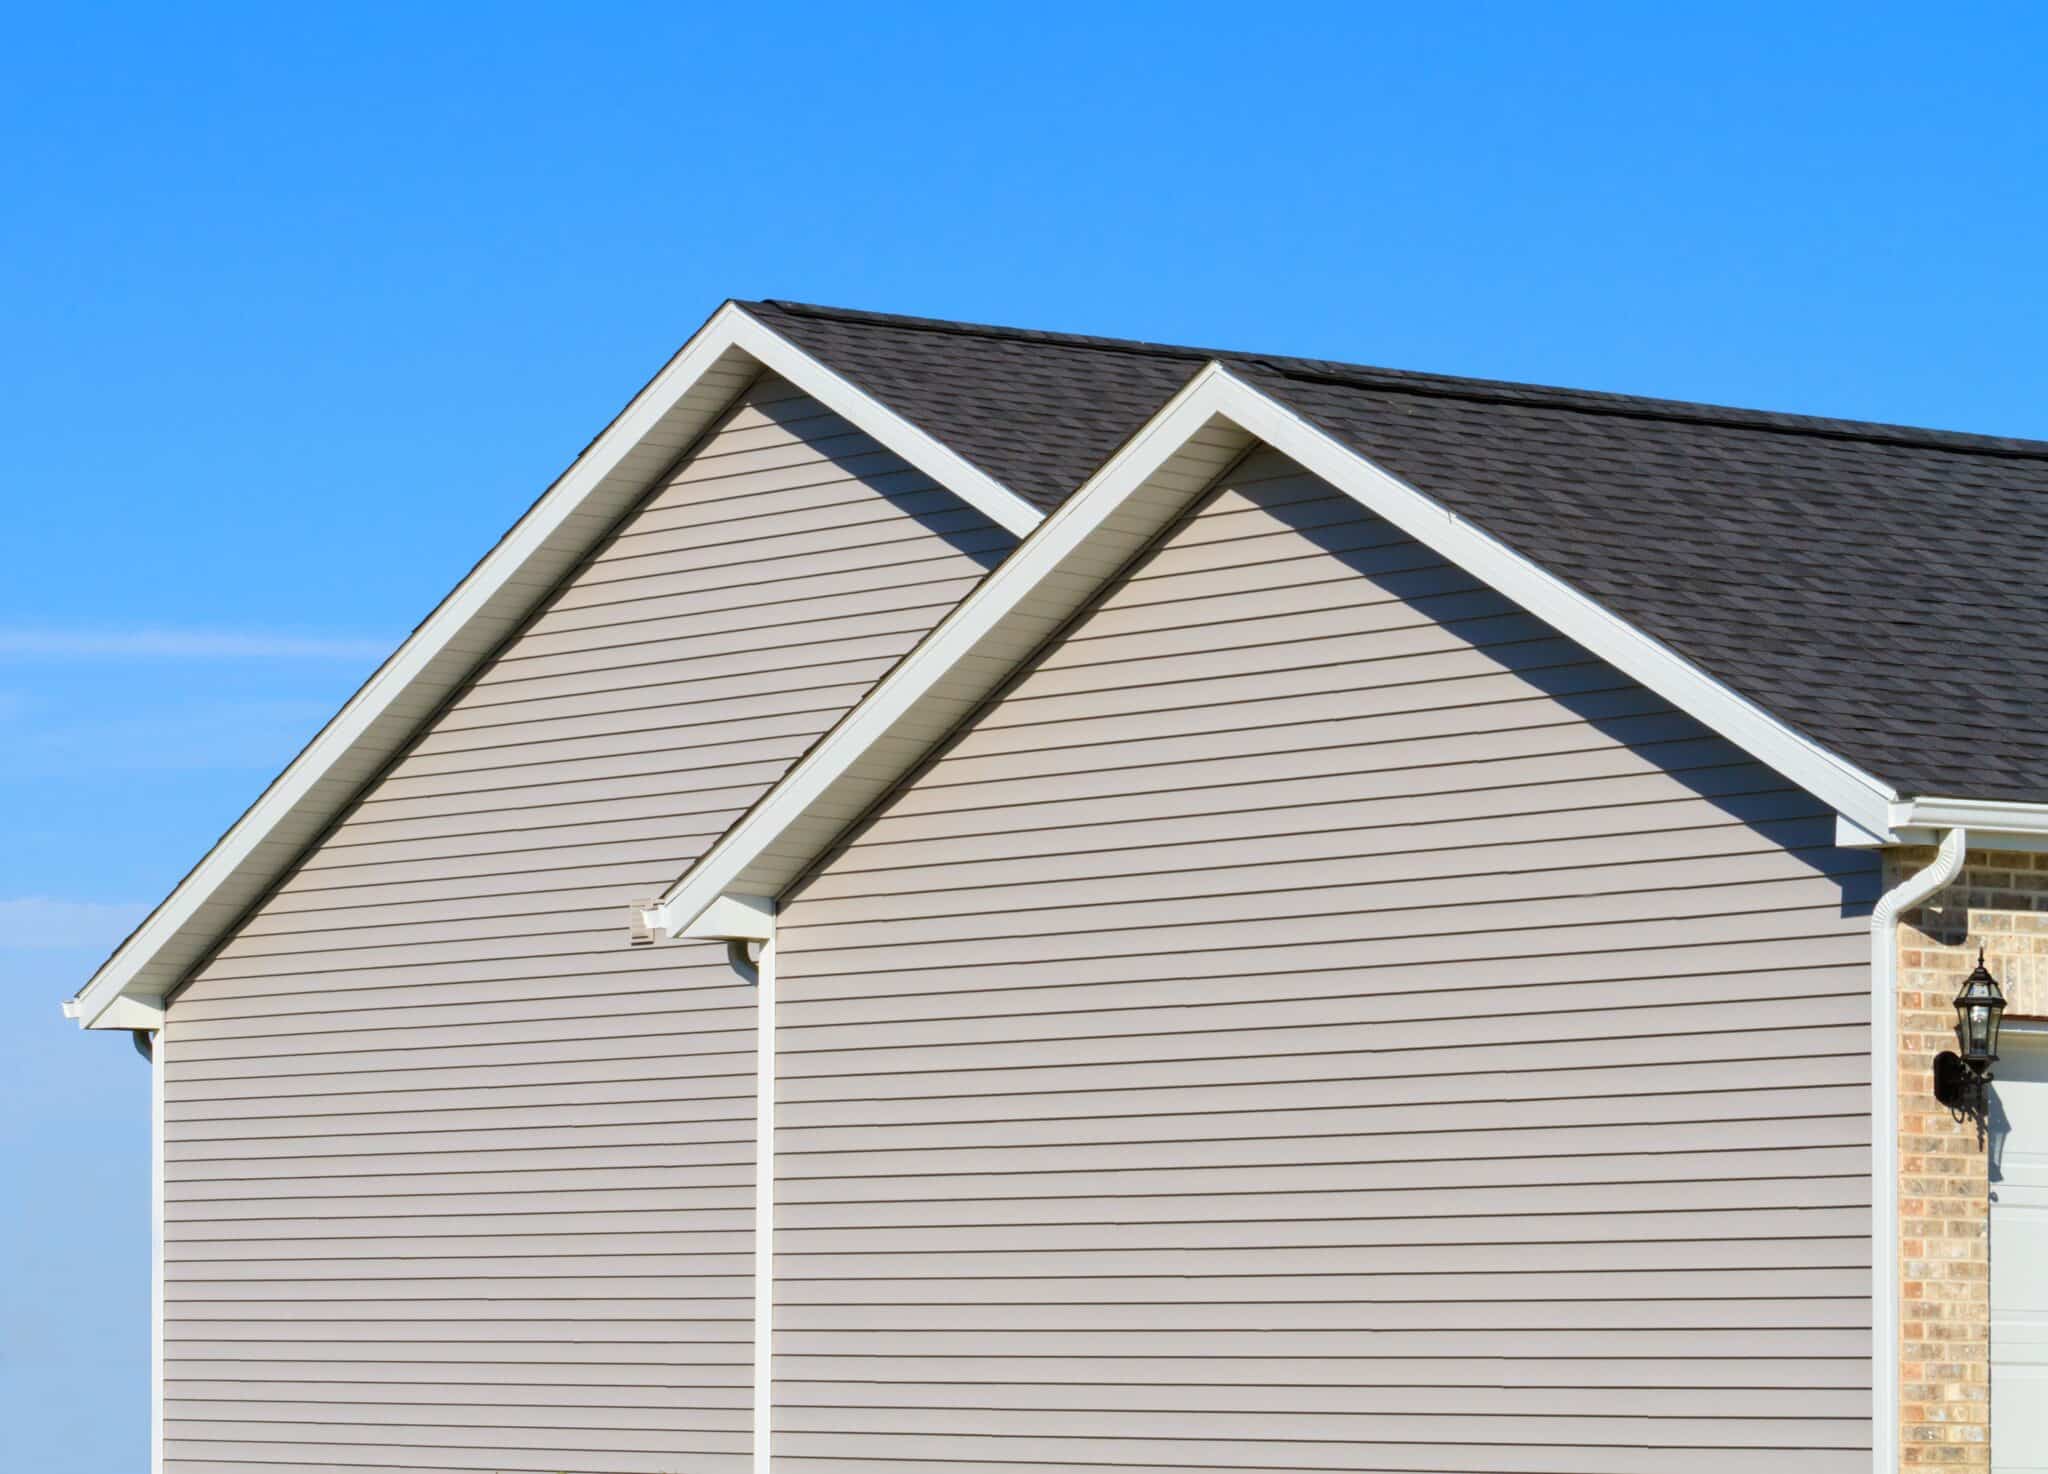 Looking to renovate your home exterior? There are so many siding options available to customize your home so it looks clean and fabulous all year long.